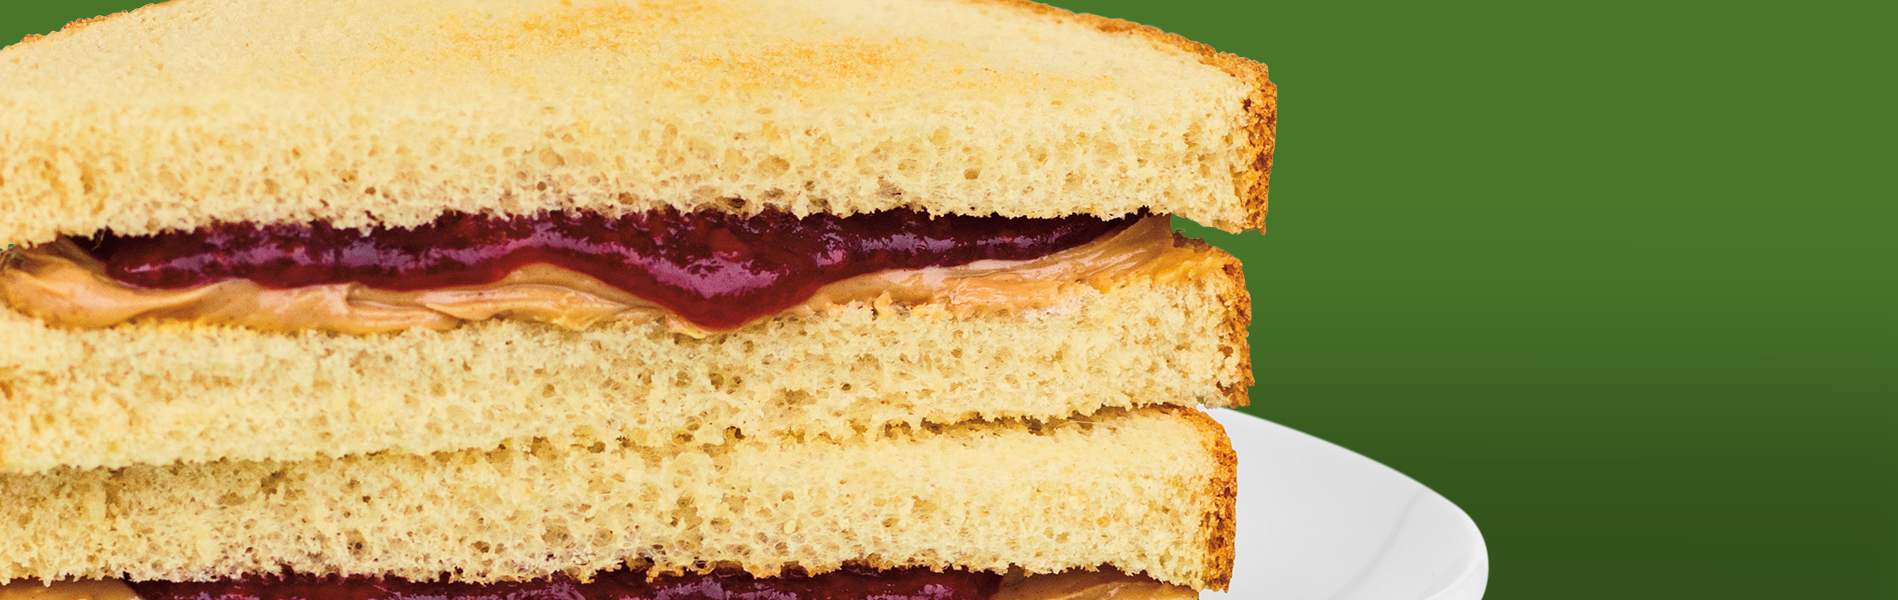 Peanut Butter and Jelly Sandwich on Sara Lee® White Bread Made with Veggies